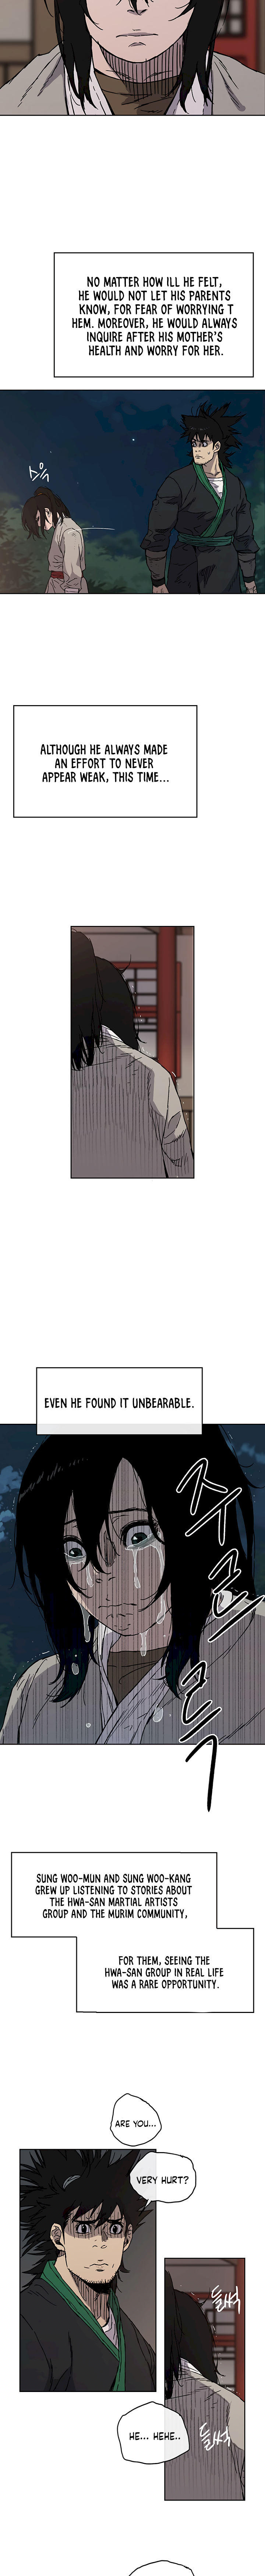 The Undefeatable Swordsman - Chapter 1 Page 22